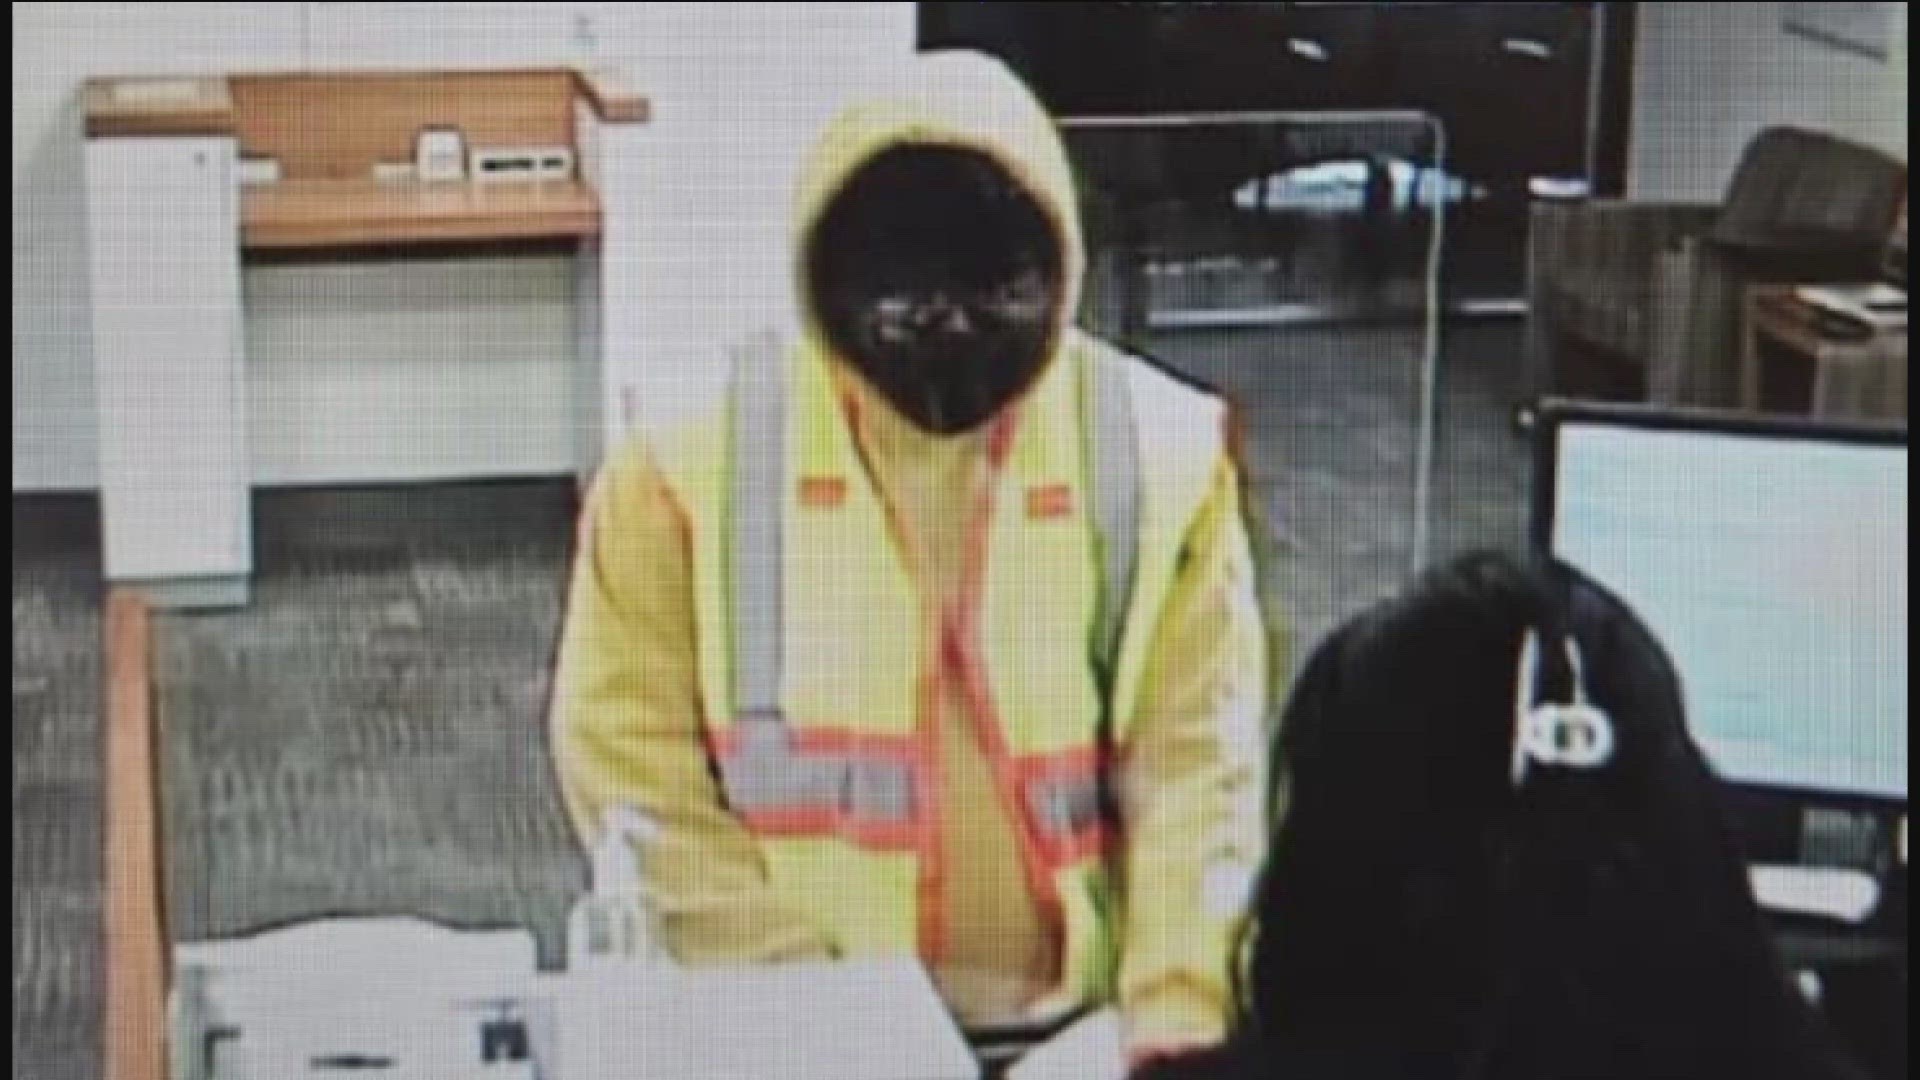 The FBI said the PNC Bank located at 735 S. Main Street was robbed at approximately noon and the suspect left the bank with an undisclosed amount of money.